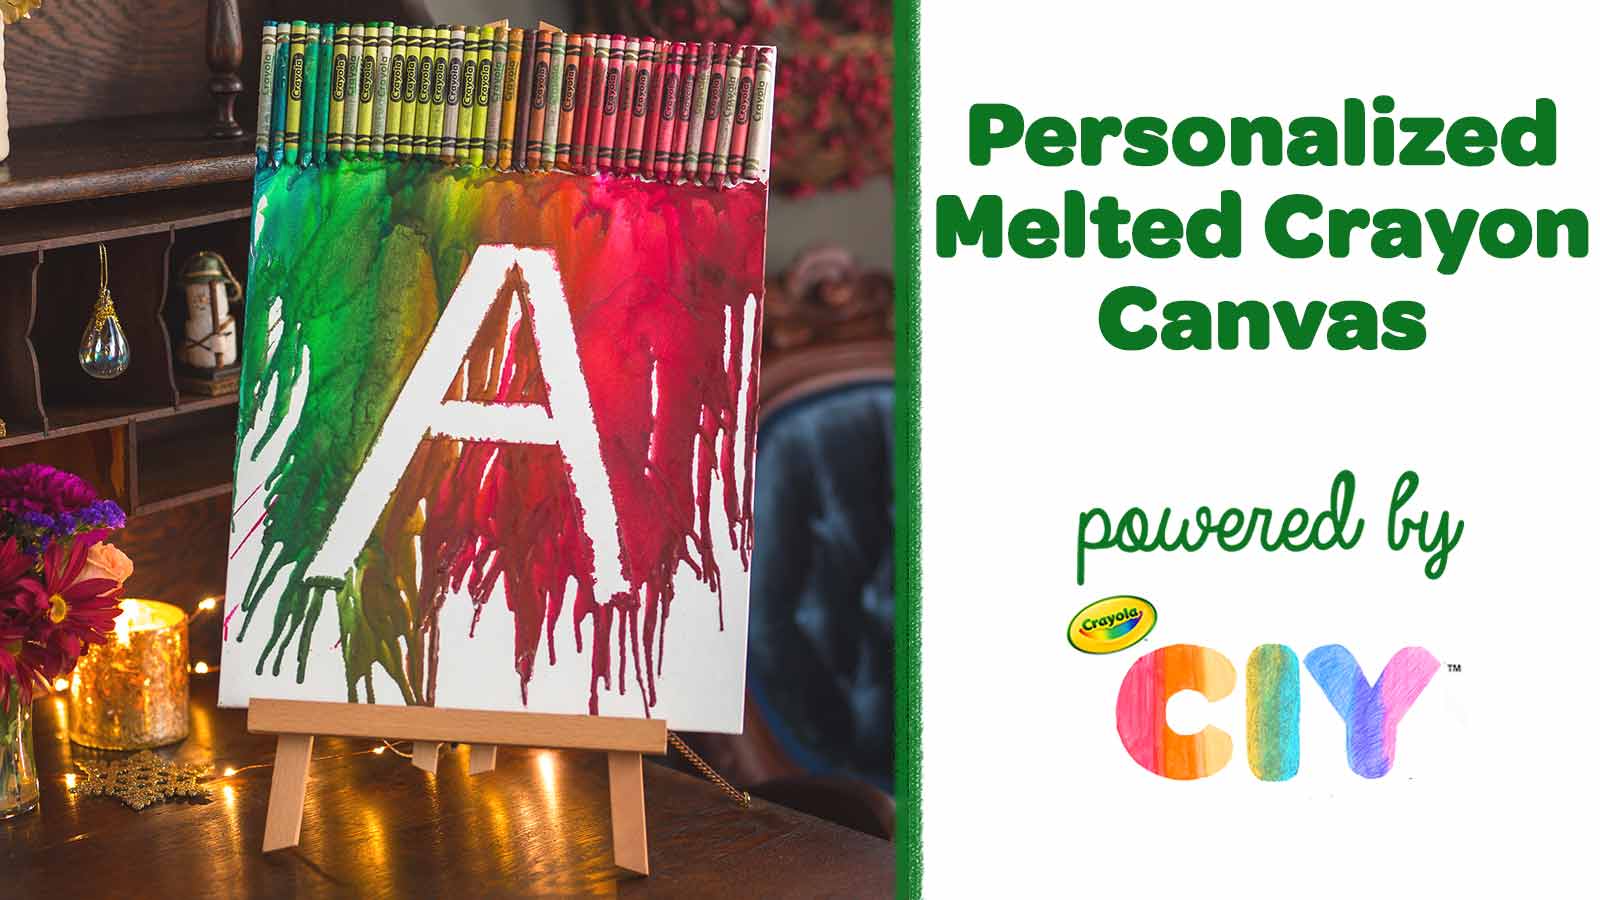 https://www.crayola.com/-/media/Crafts-New/Poster-Frames/1600x900/Personalized-Melted-Crayon-Canvas_Poster-Frame.jpg